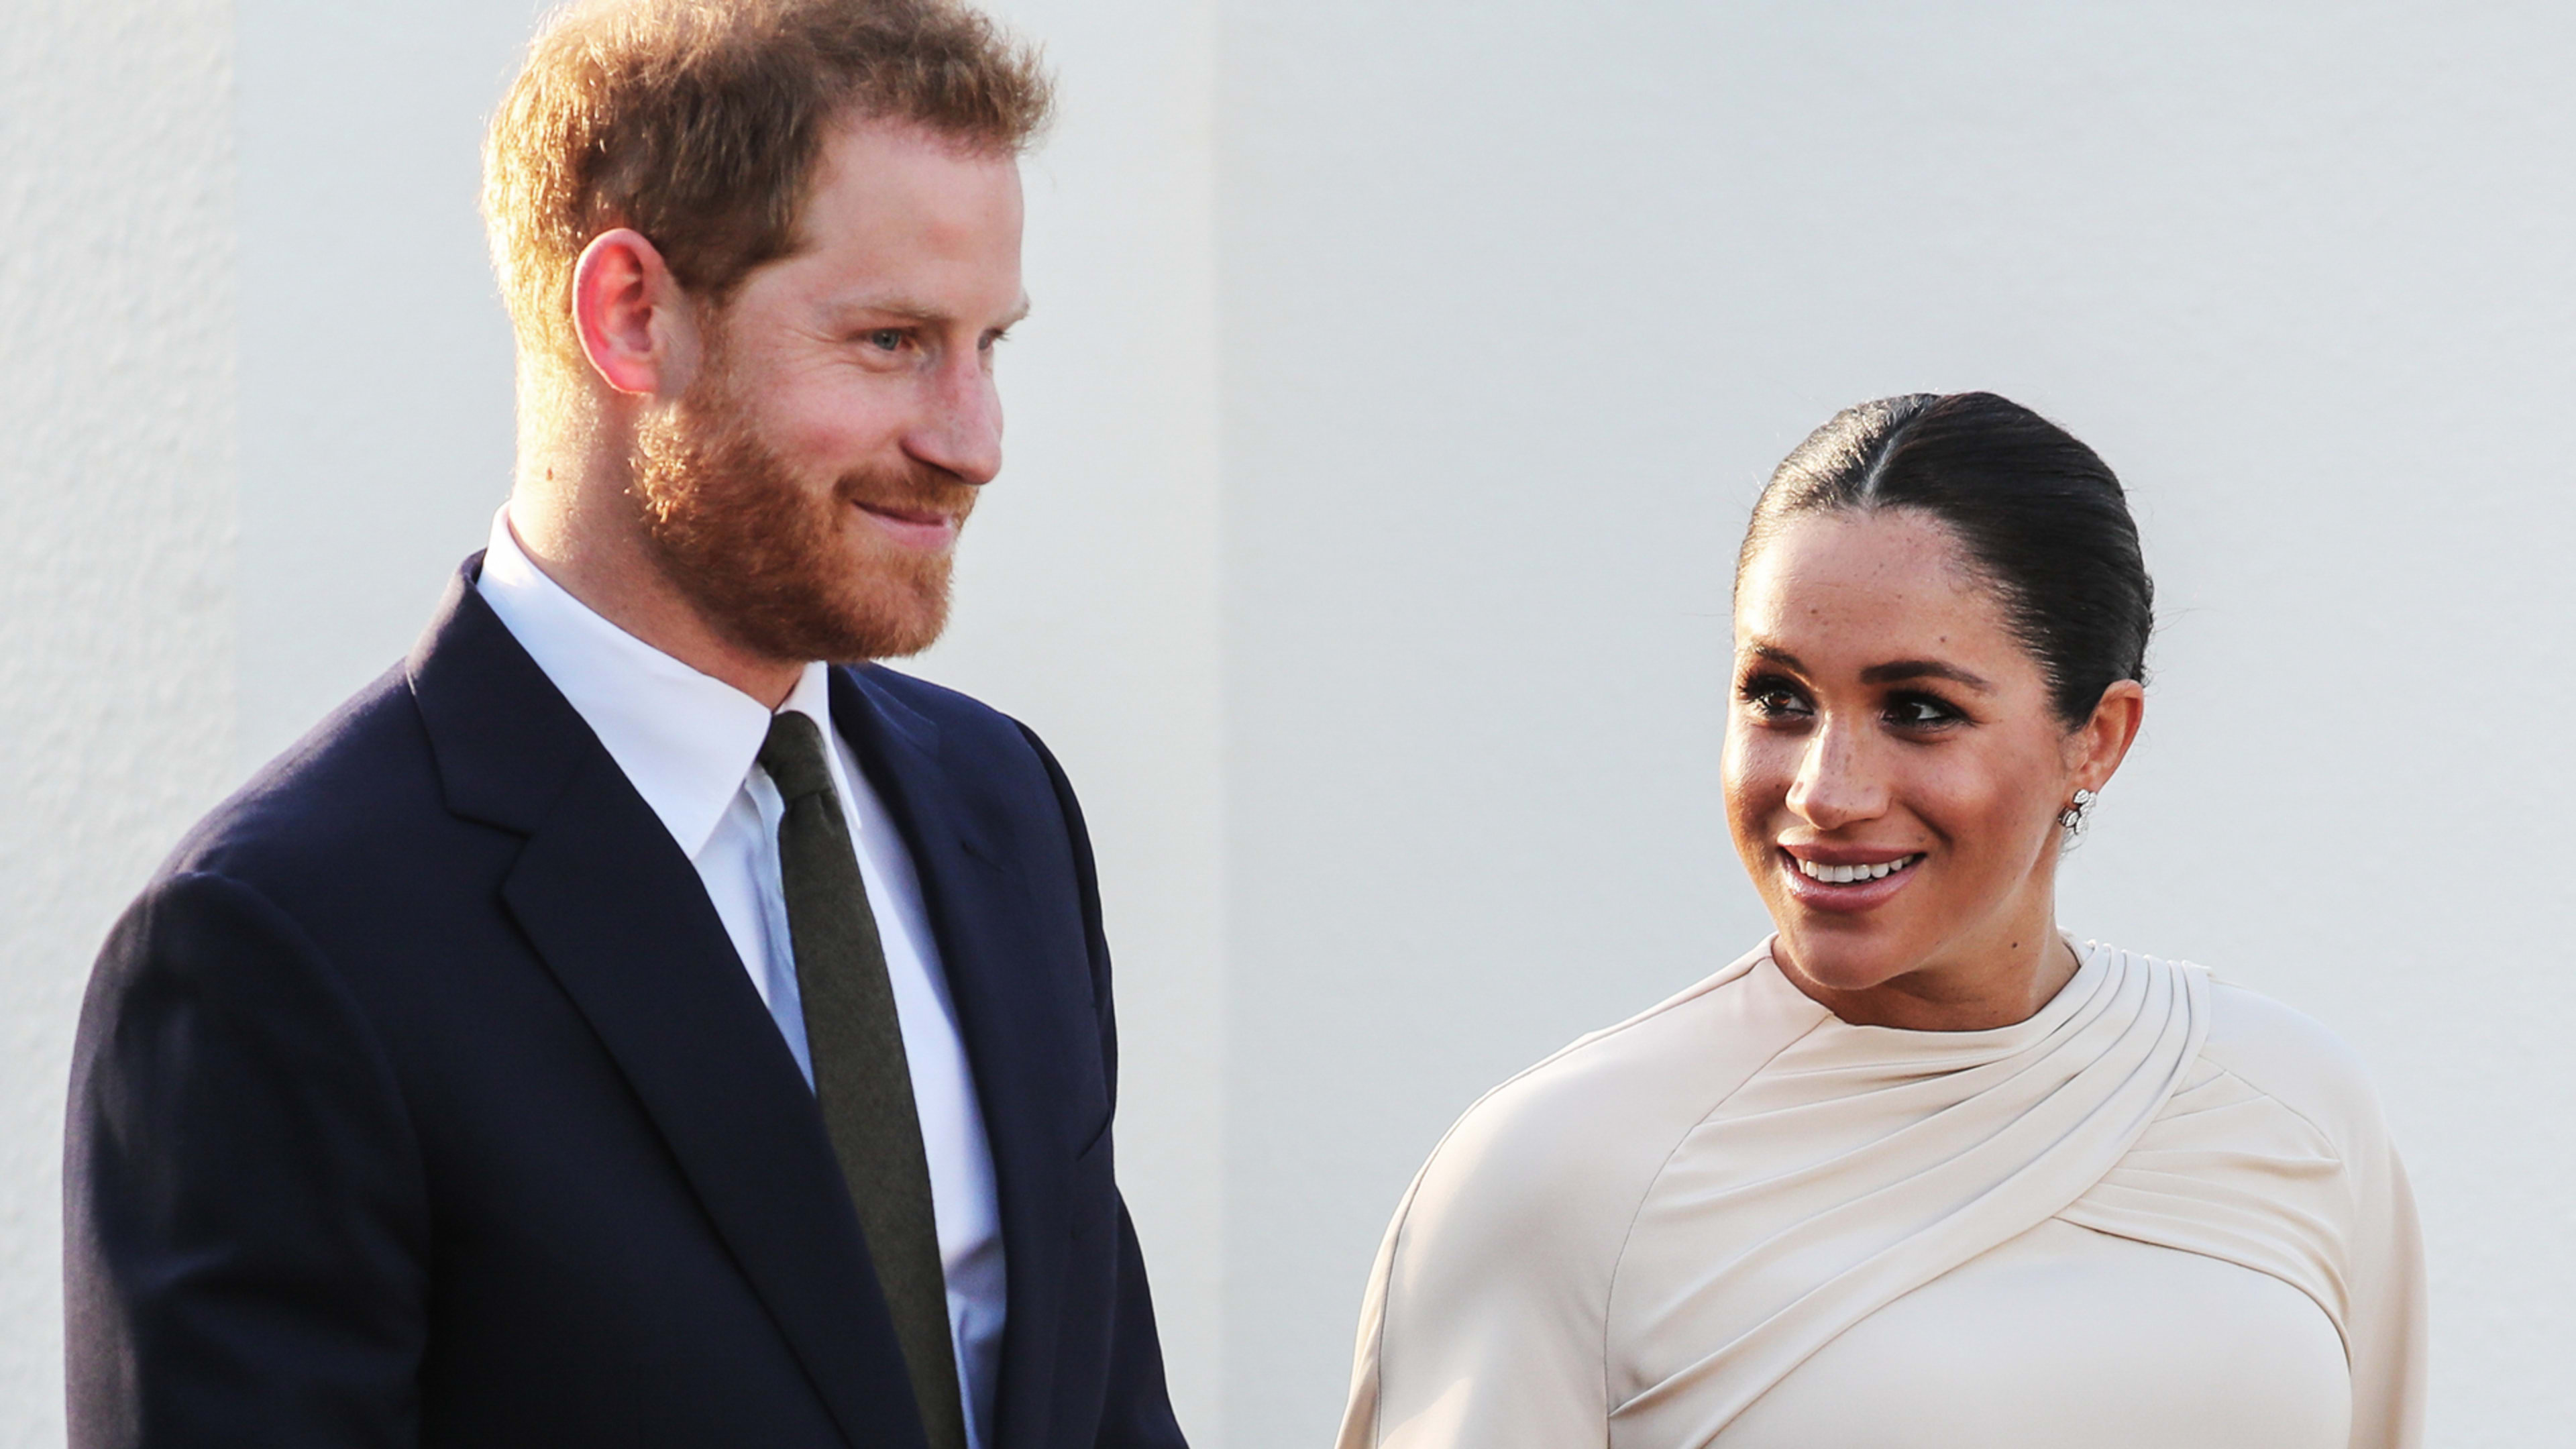 Prince Harry and Meghan Markle just gave Instagram birth announcements the royal seal of approval